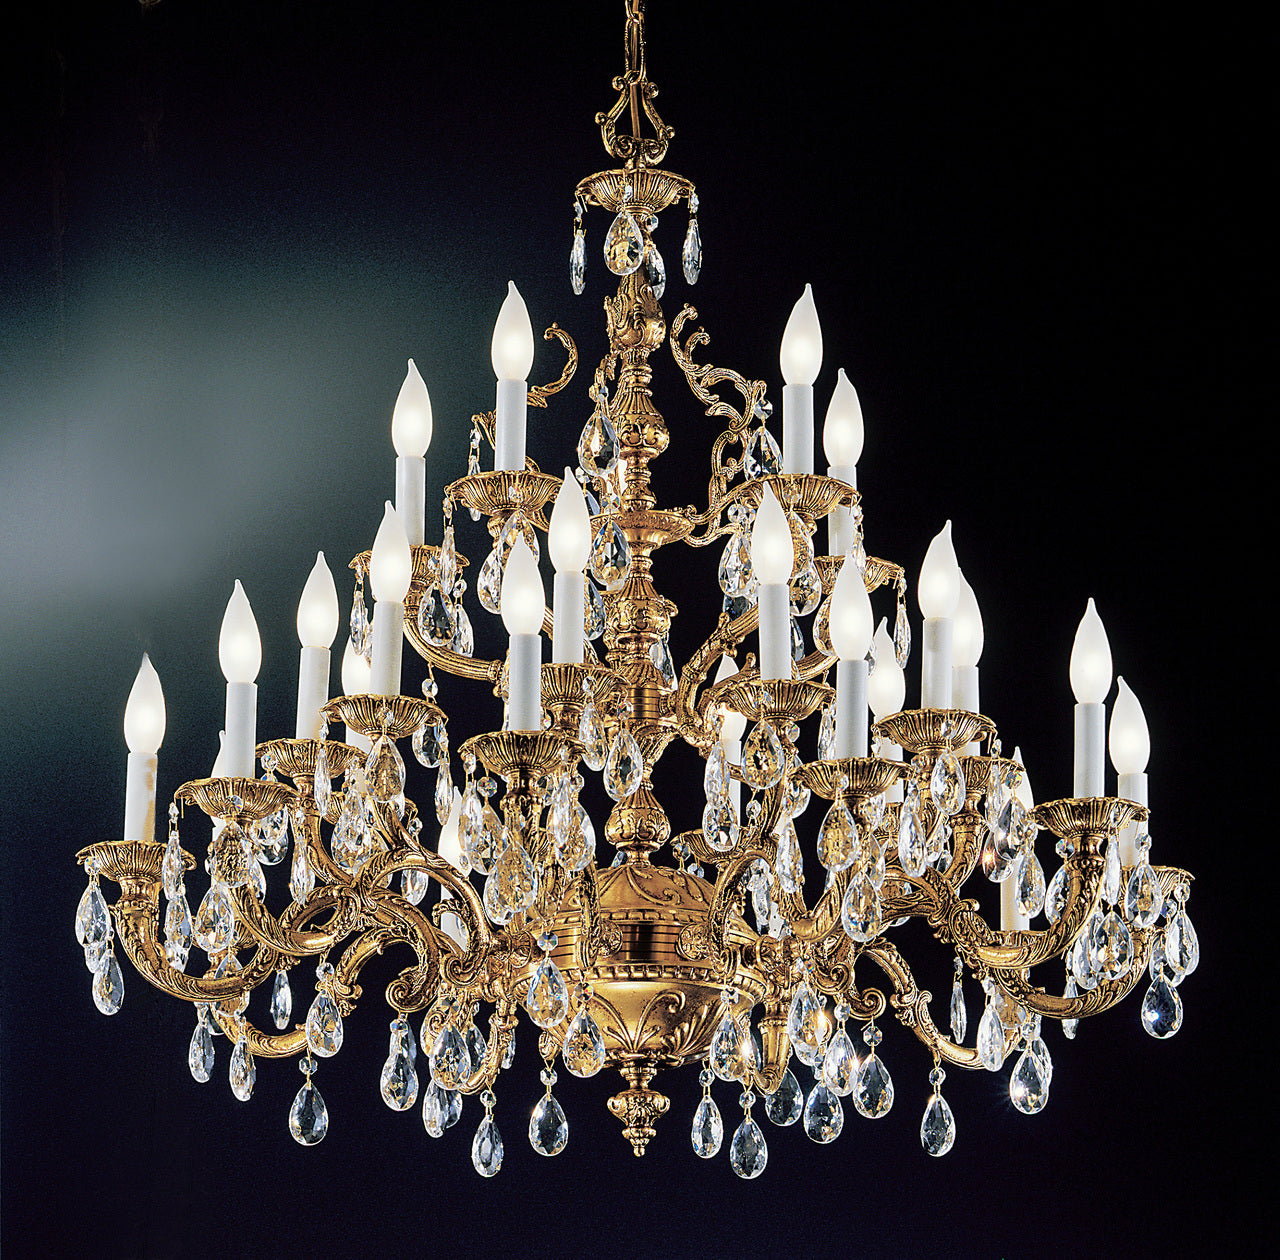 Classic Lighting 5525 OWB SC Barcelona Crystal/Cast Brass Chandelier in Olde World Bronze (Imported from Spain)